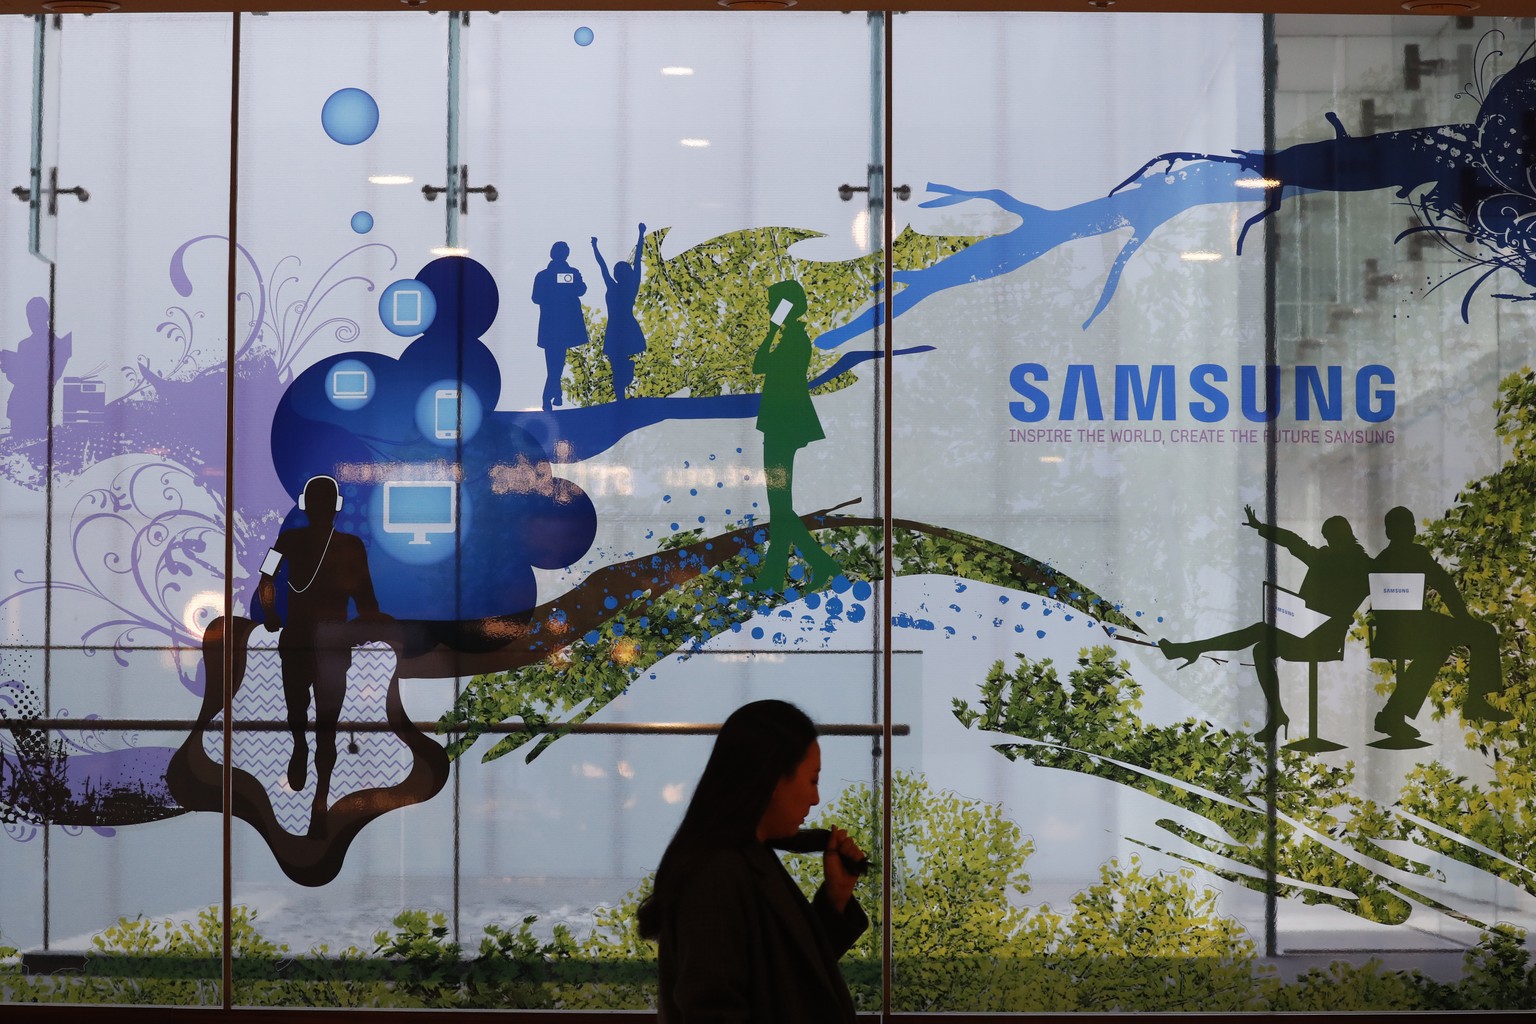 epa07268796 A South Korean woman stands next to a Samsung advertisement at the Samsung Electronics headquarters in Seoul, South Korea, 08 January 2019. Samsung Electronics Co. said on 08 January its o ...